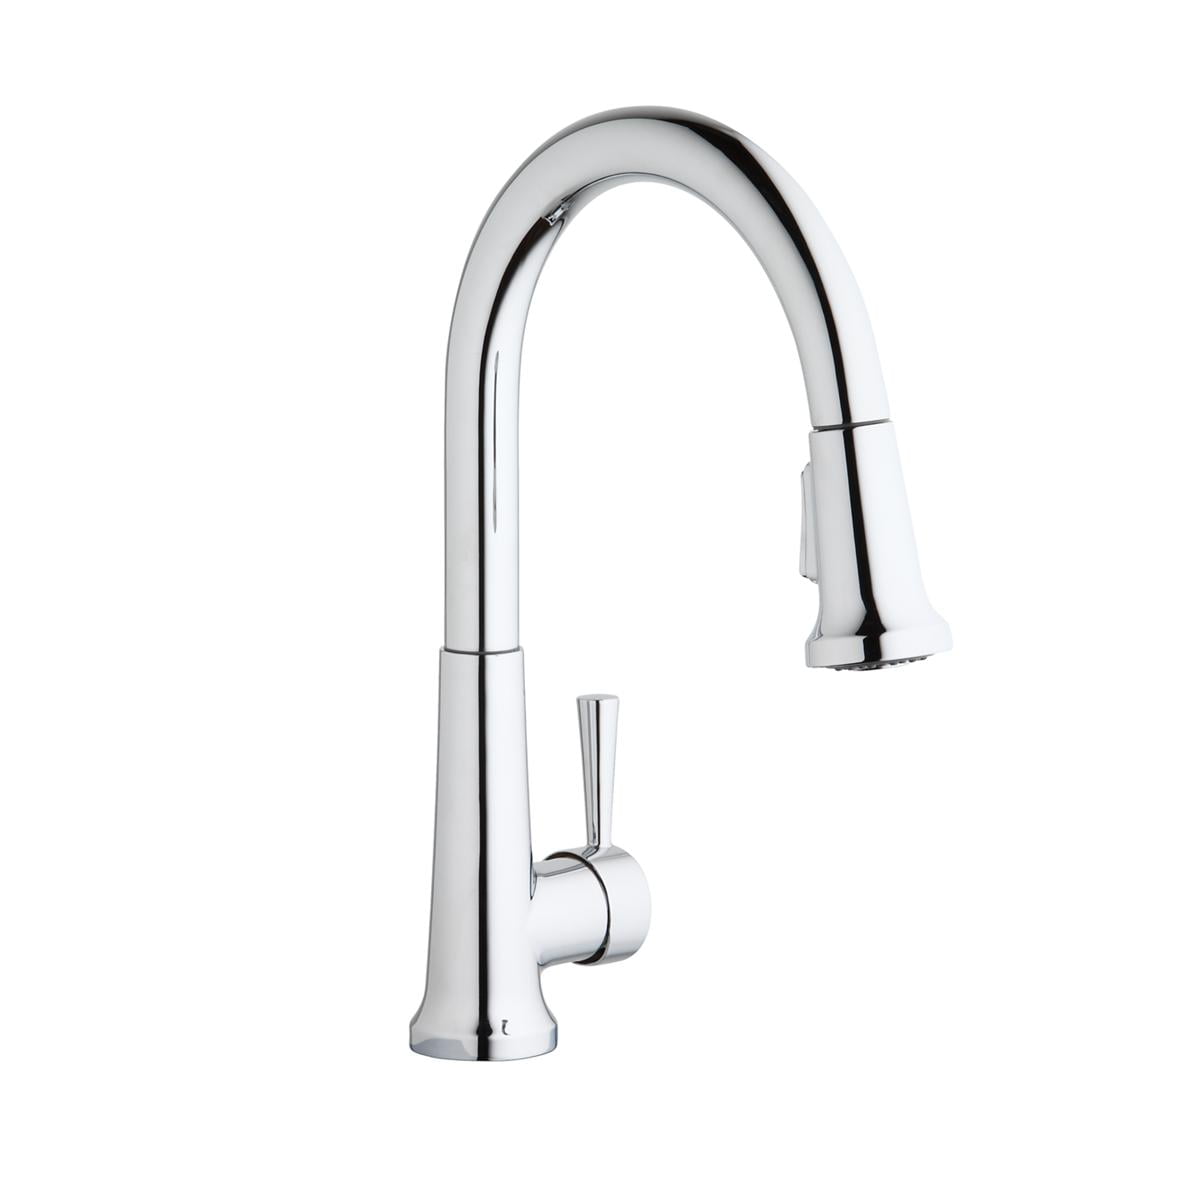 Single Chrome Only Handle Hole Faucet Kitchen Everyday Lever Forward Deck with Spray Pull-down Elkay Mount